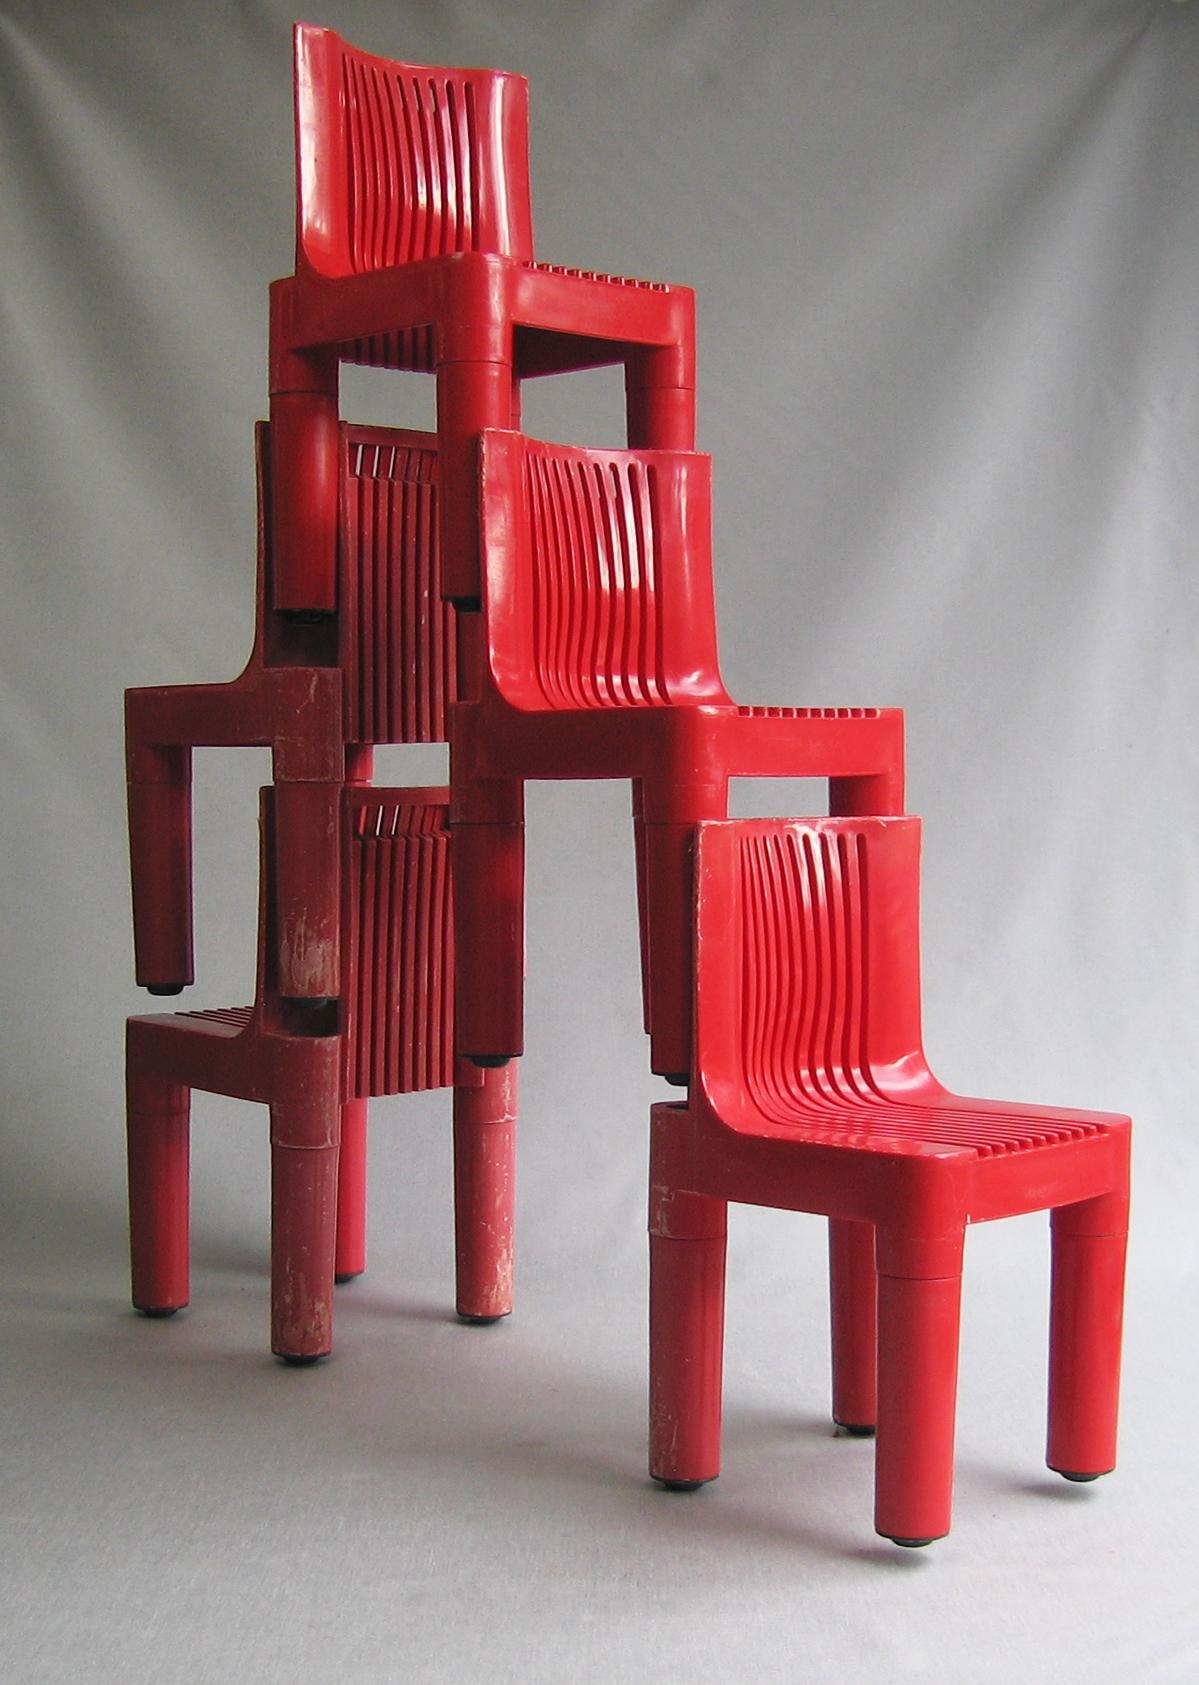 Mid-20th Century Chair model 4999 Kartell Marco Zanuso / Richard Sapper 1964 First production 6x For Sale